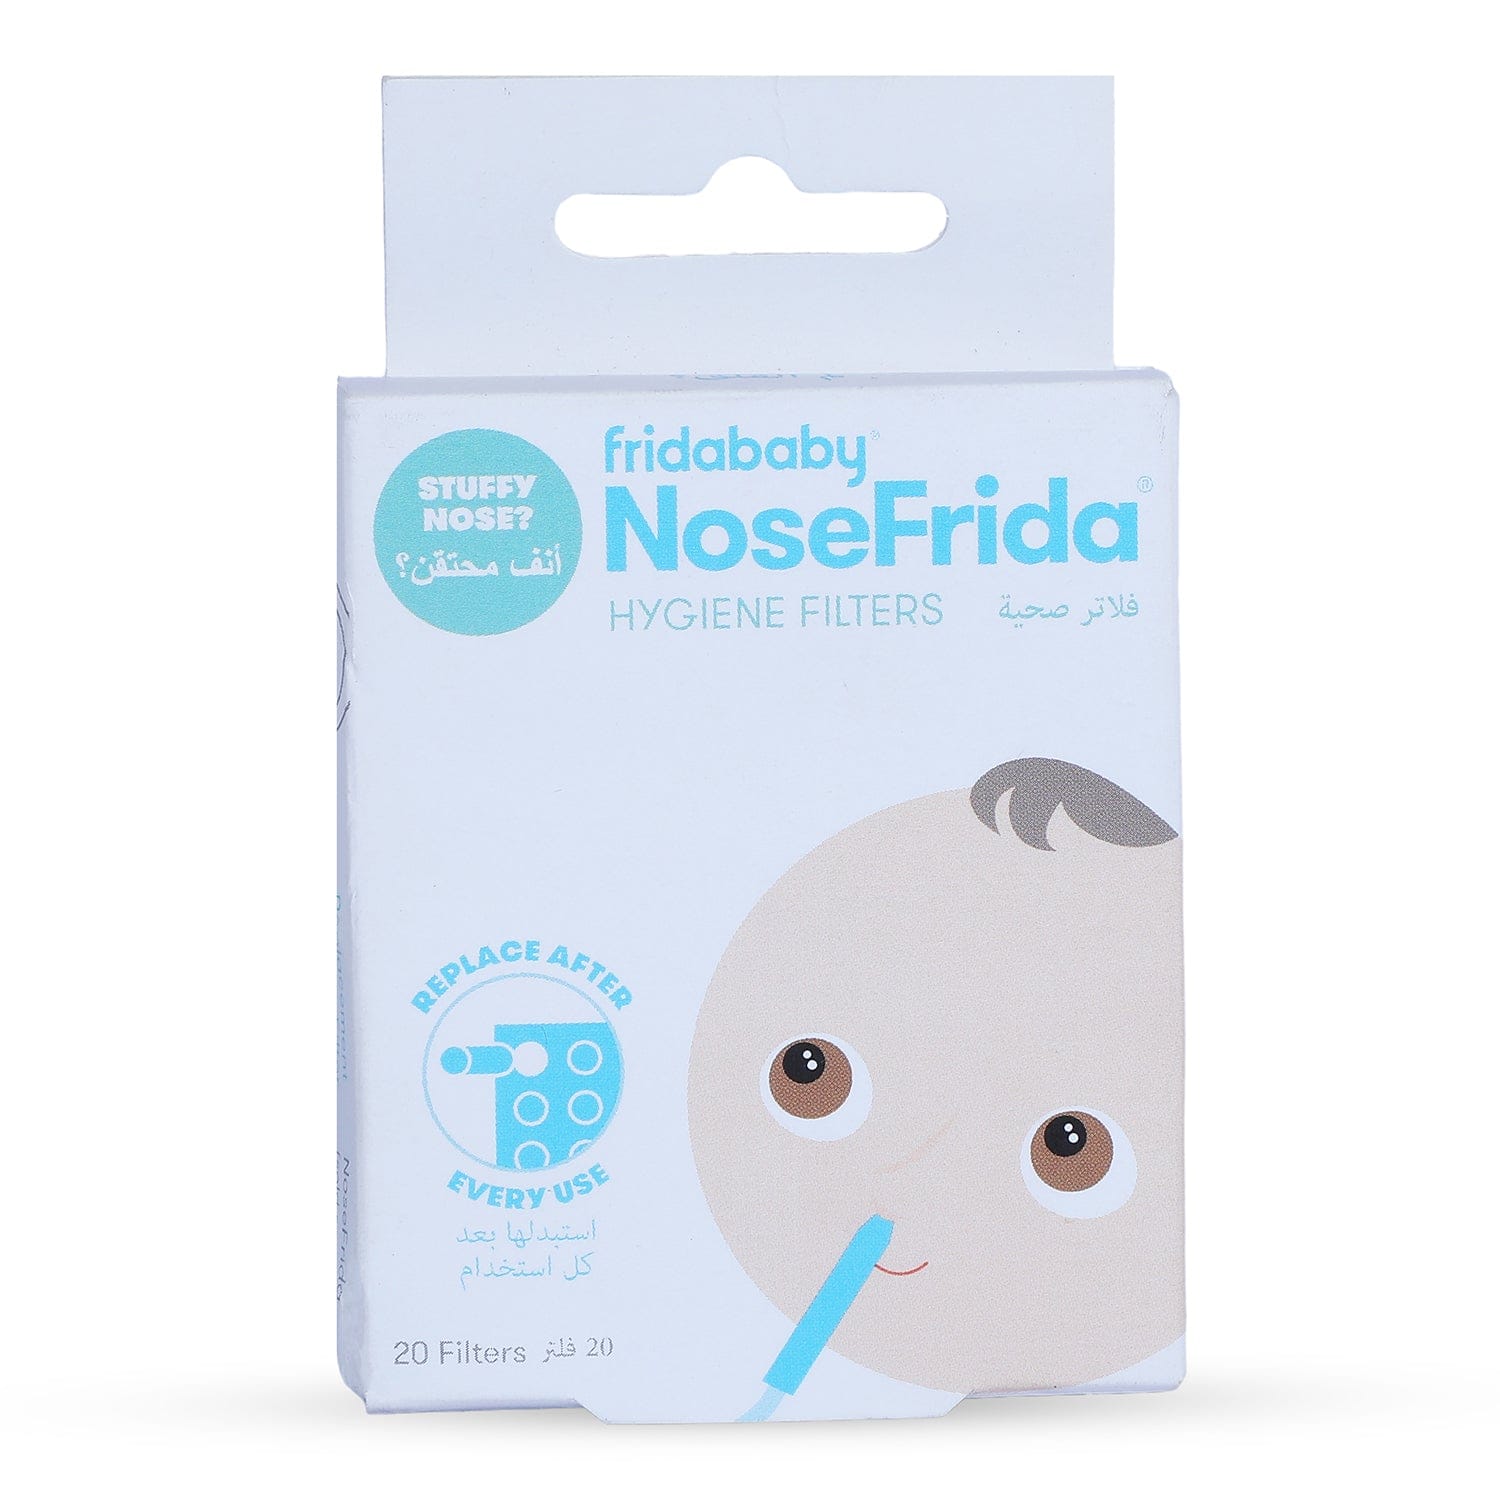 Fridababy Nosefrida Replacement Filters